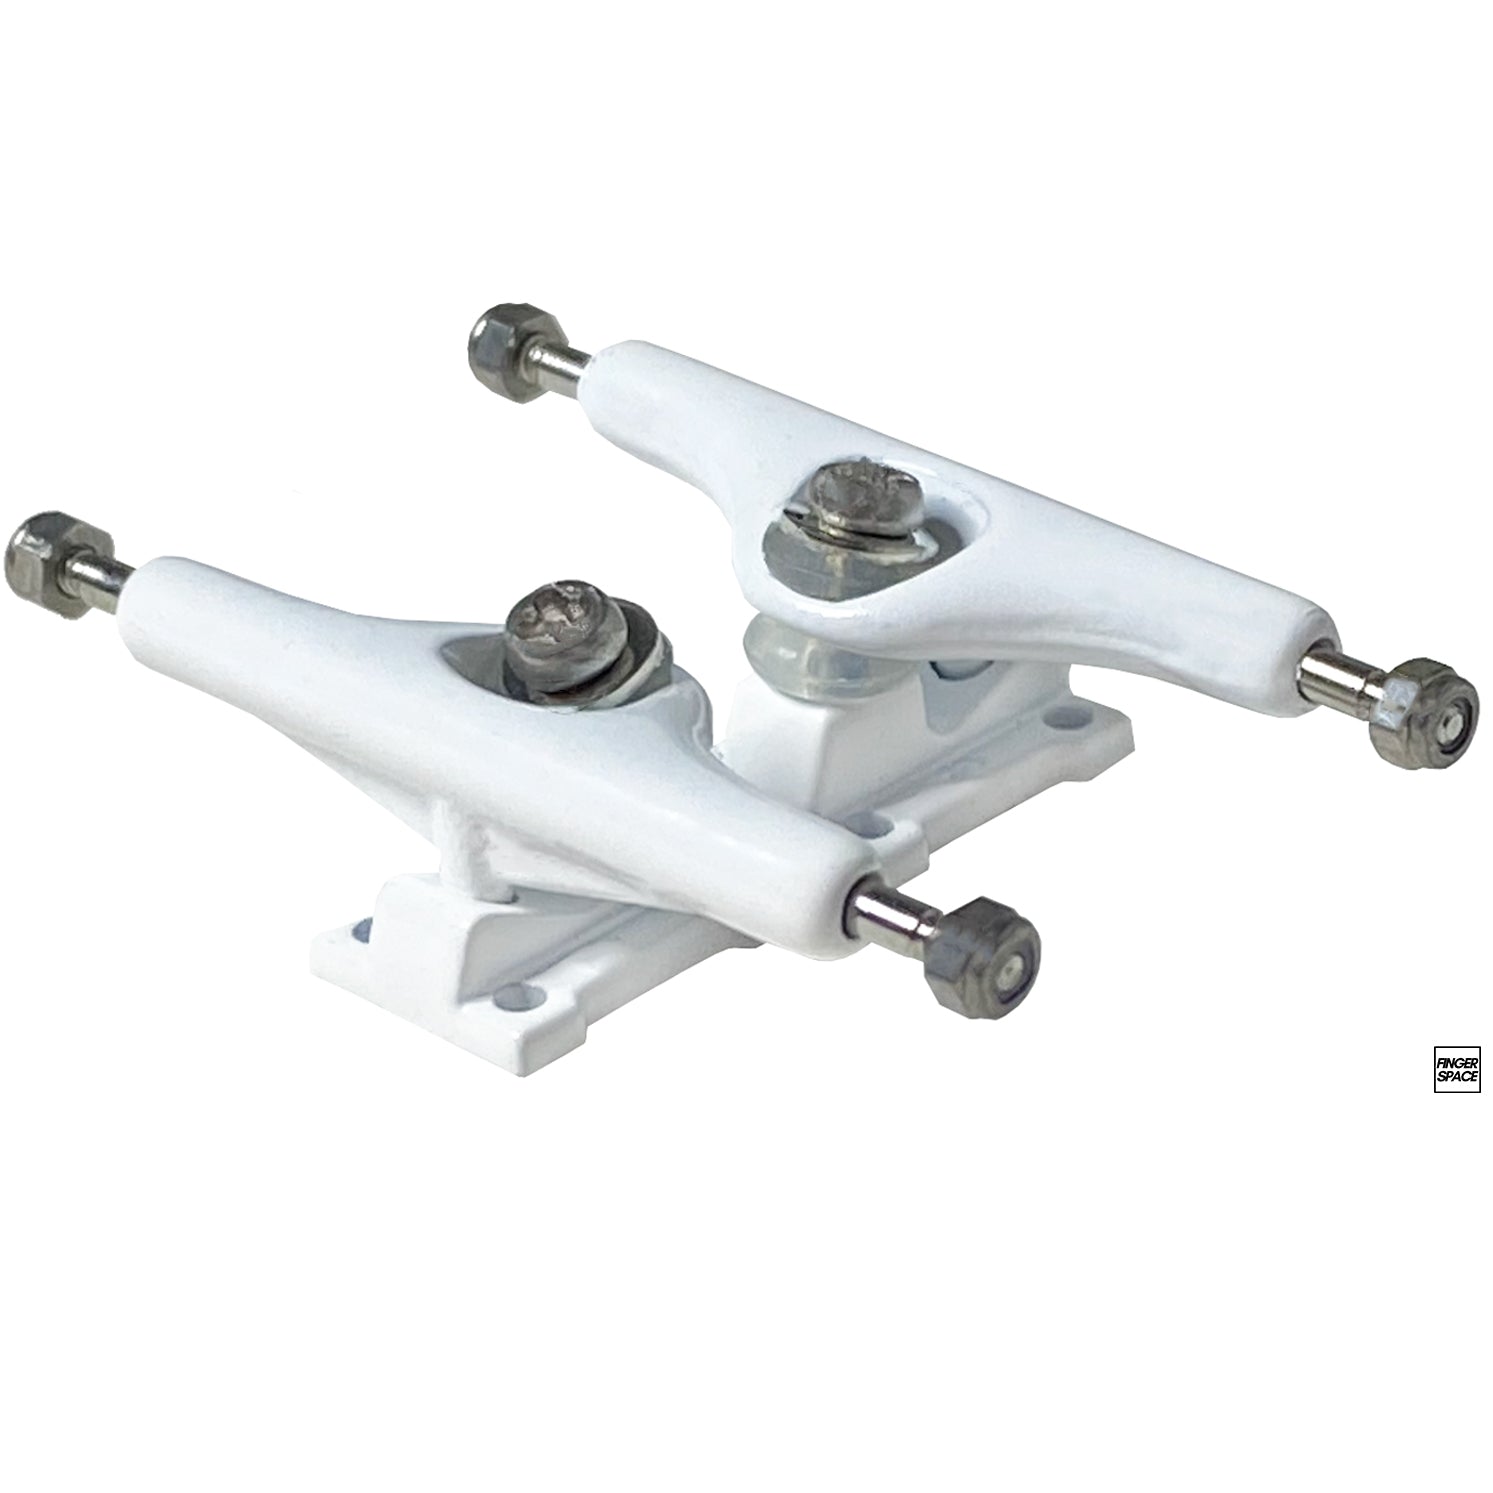 34mm Olympus Pro Fingerboard Trucks - "Artemis White" Colorway with Inverted Kingpins